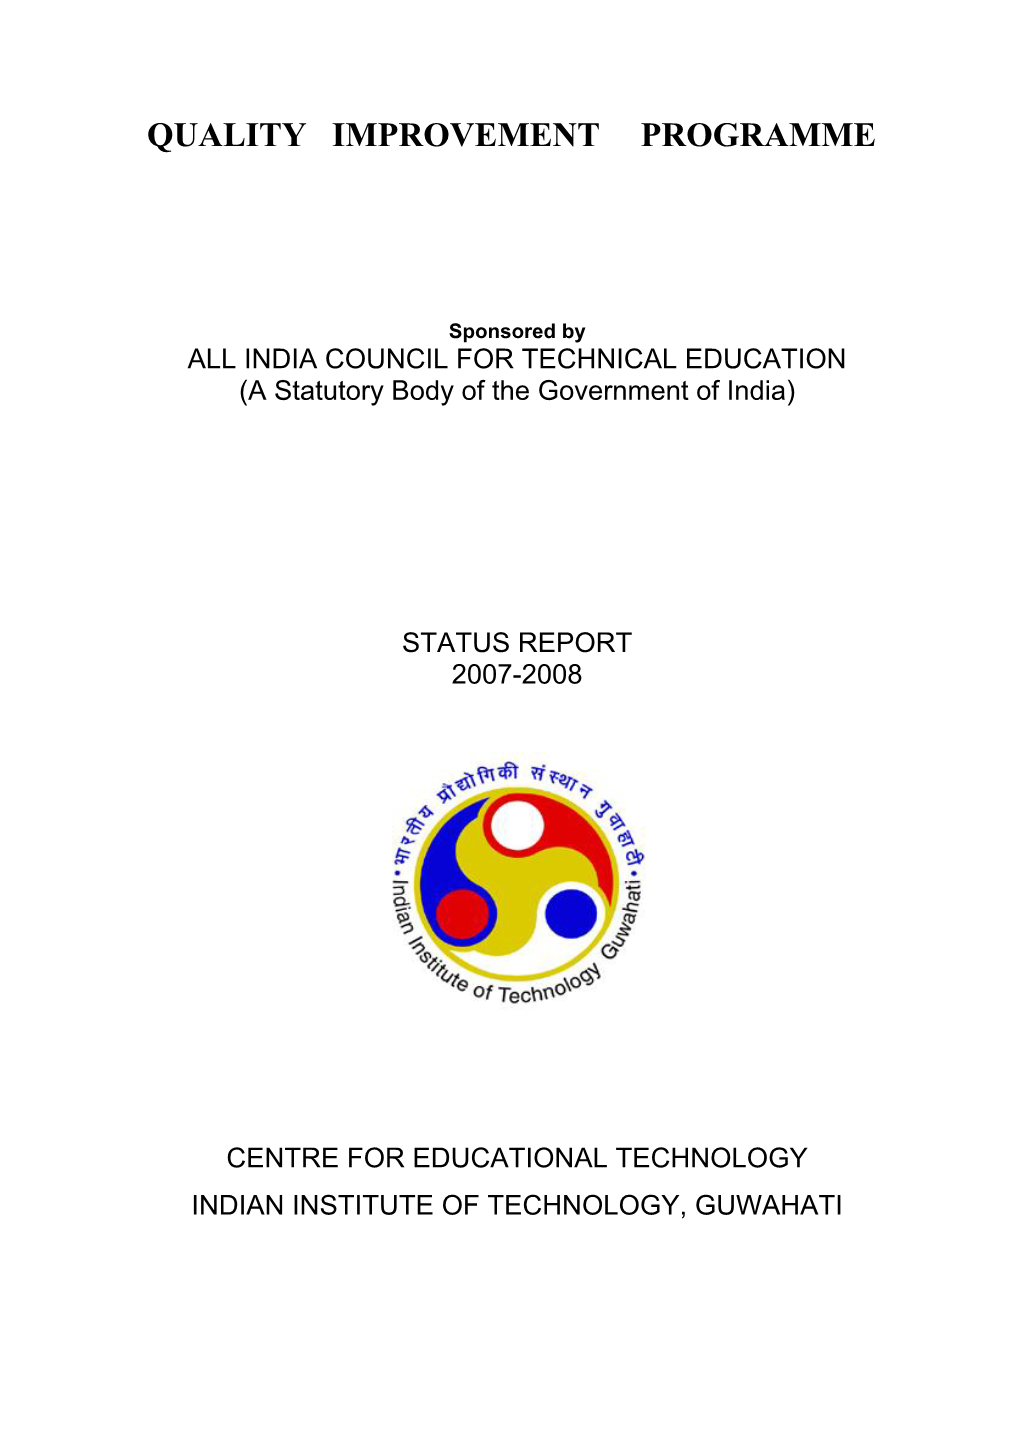 INDIA COUNCIL for TECHNICAL EDUCATION (A Statutory Body of the Government of India)